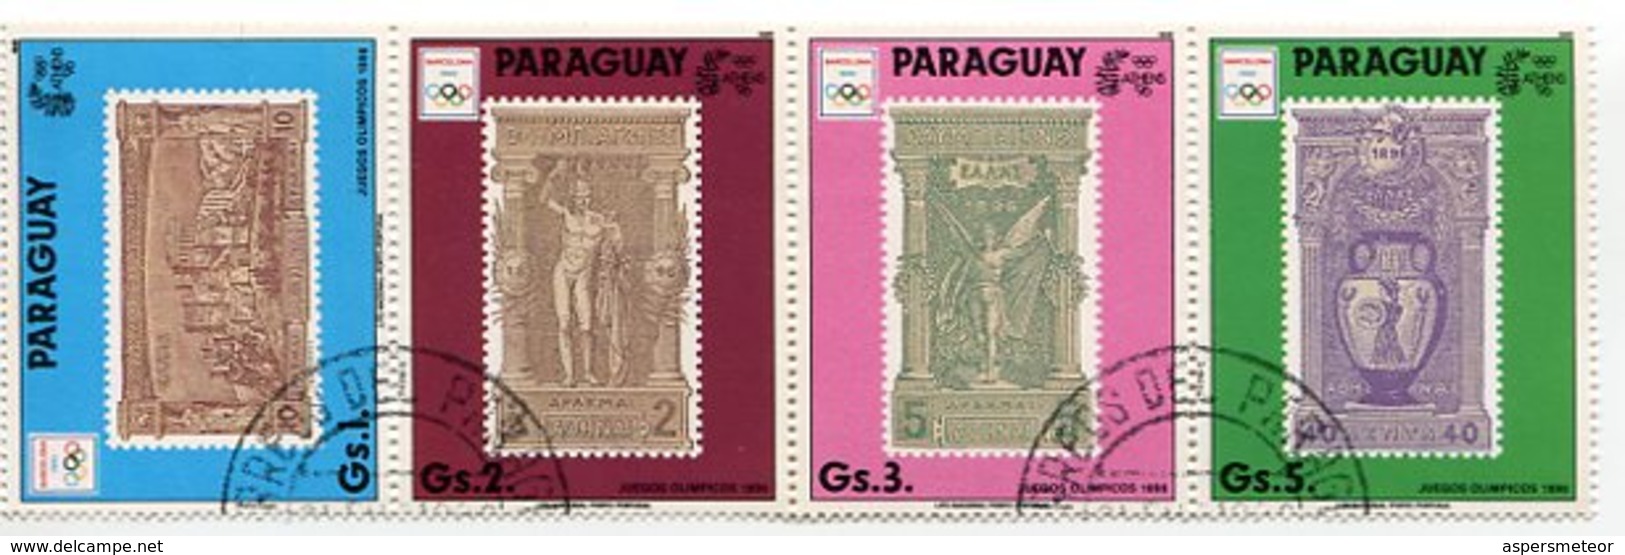 OLYMPIC GAMES BARCELONA '92 - ATENAS '96. PARAGUAY YVERT 2490 / 2494 YEAR 1990 COMPLETE SERIE WITH BLOCK OBLITERES LILHU - Summer 1992: Barcelona